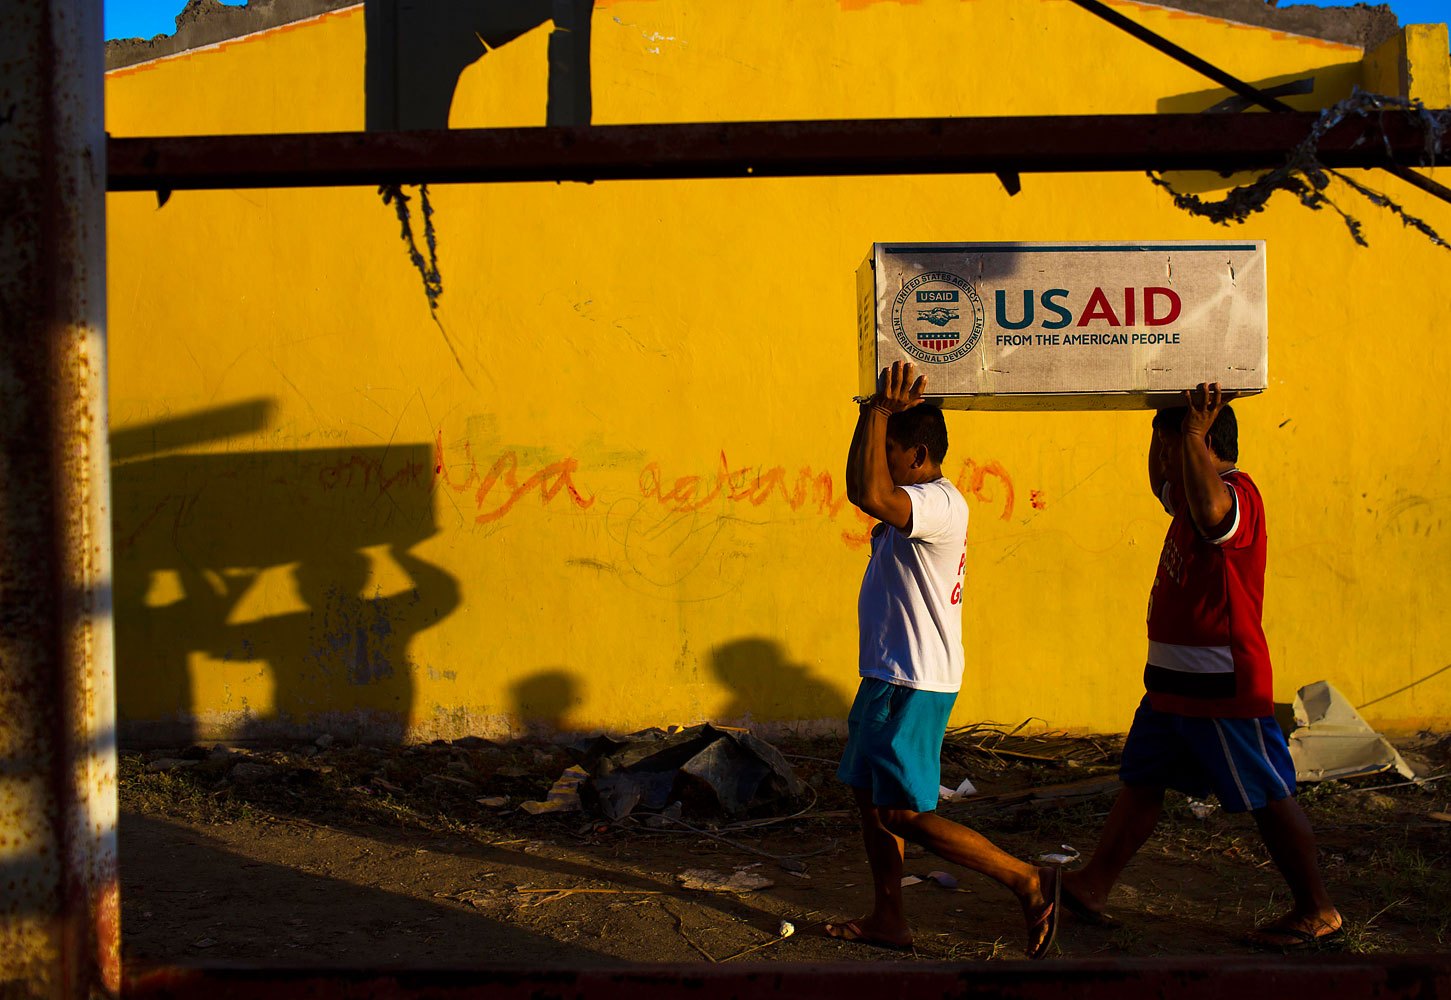 Typhoon Haiyan survivors help carry USAID donated food after a U.S. military helicopter unloaded it in the destroyed town of Guiuan, Philippines on November 14, 2013.